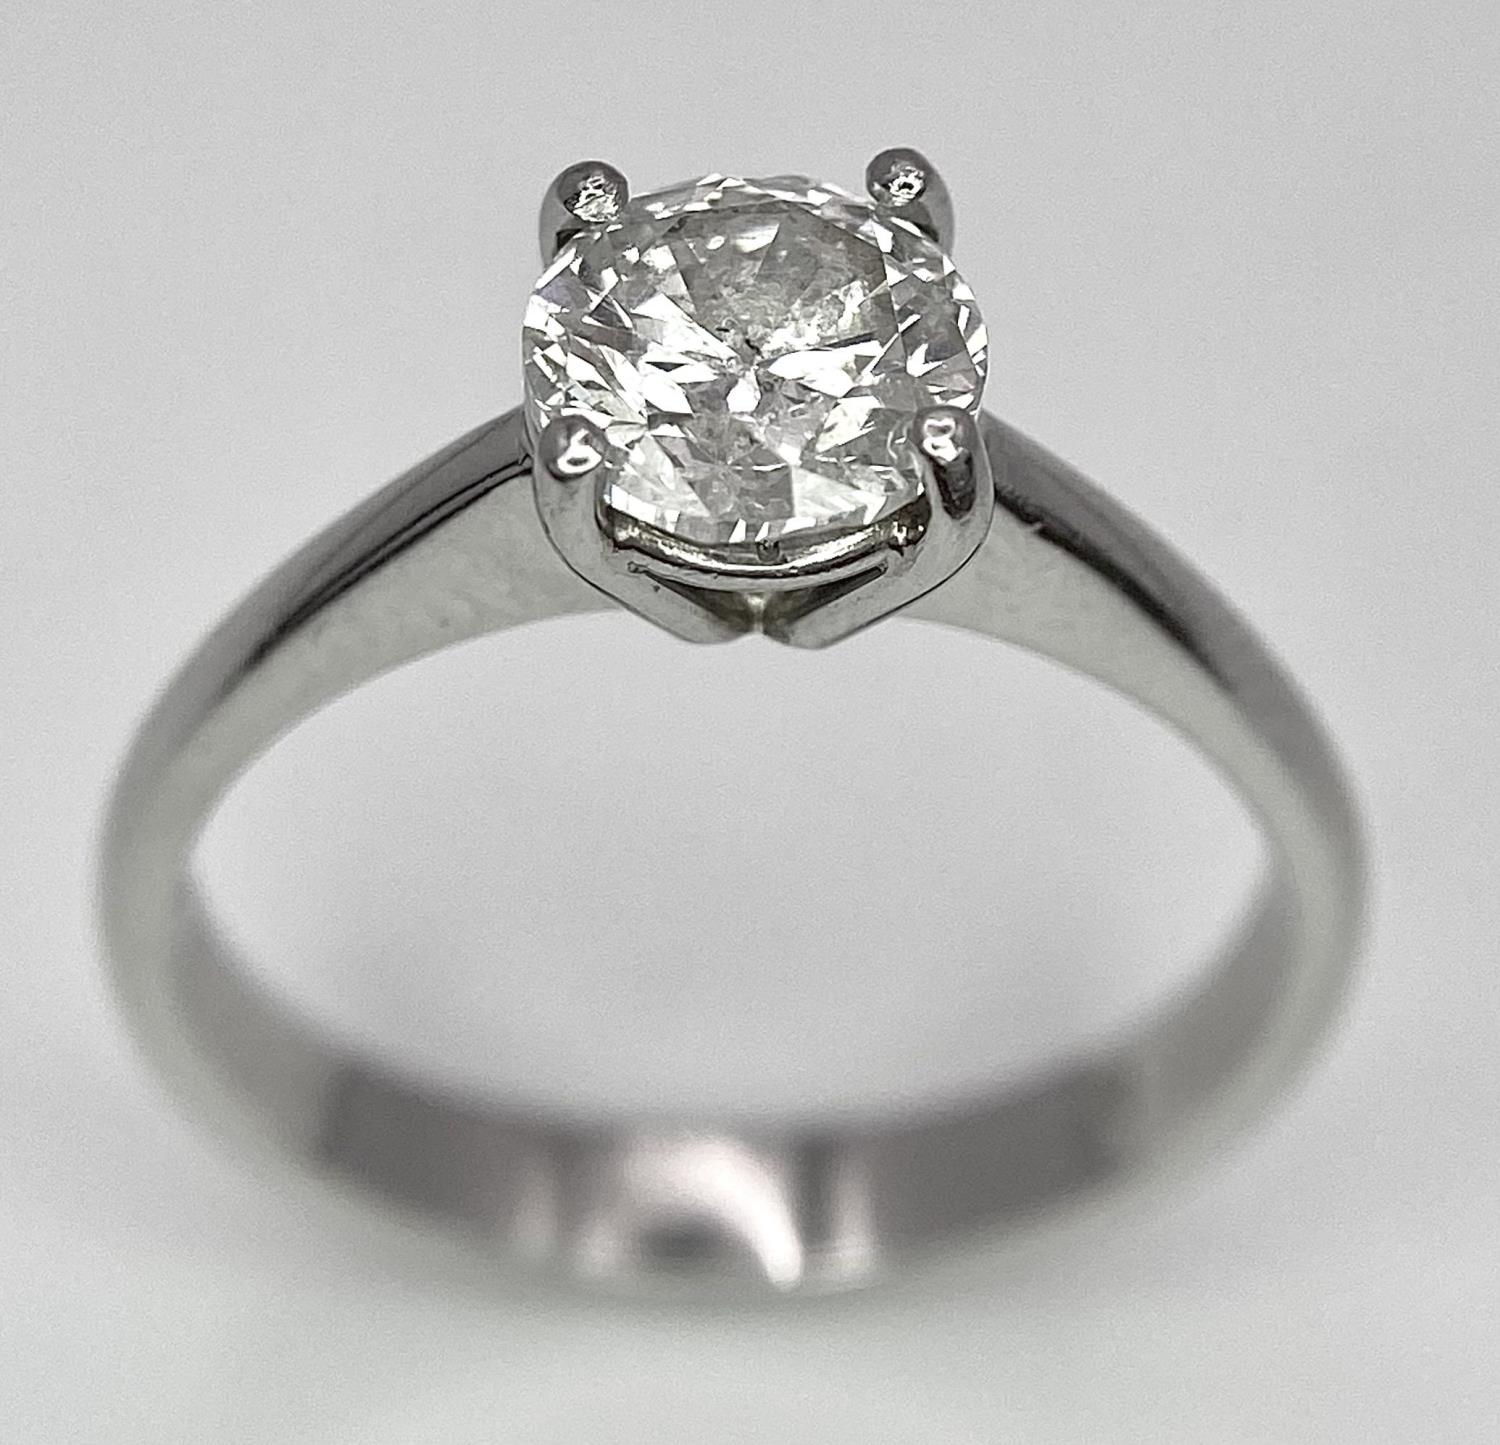 A Platinum Diamond Solitaire Ring. Size L. 4.1g total weight. - Image 2 of 6